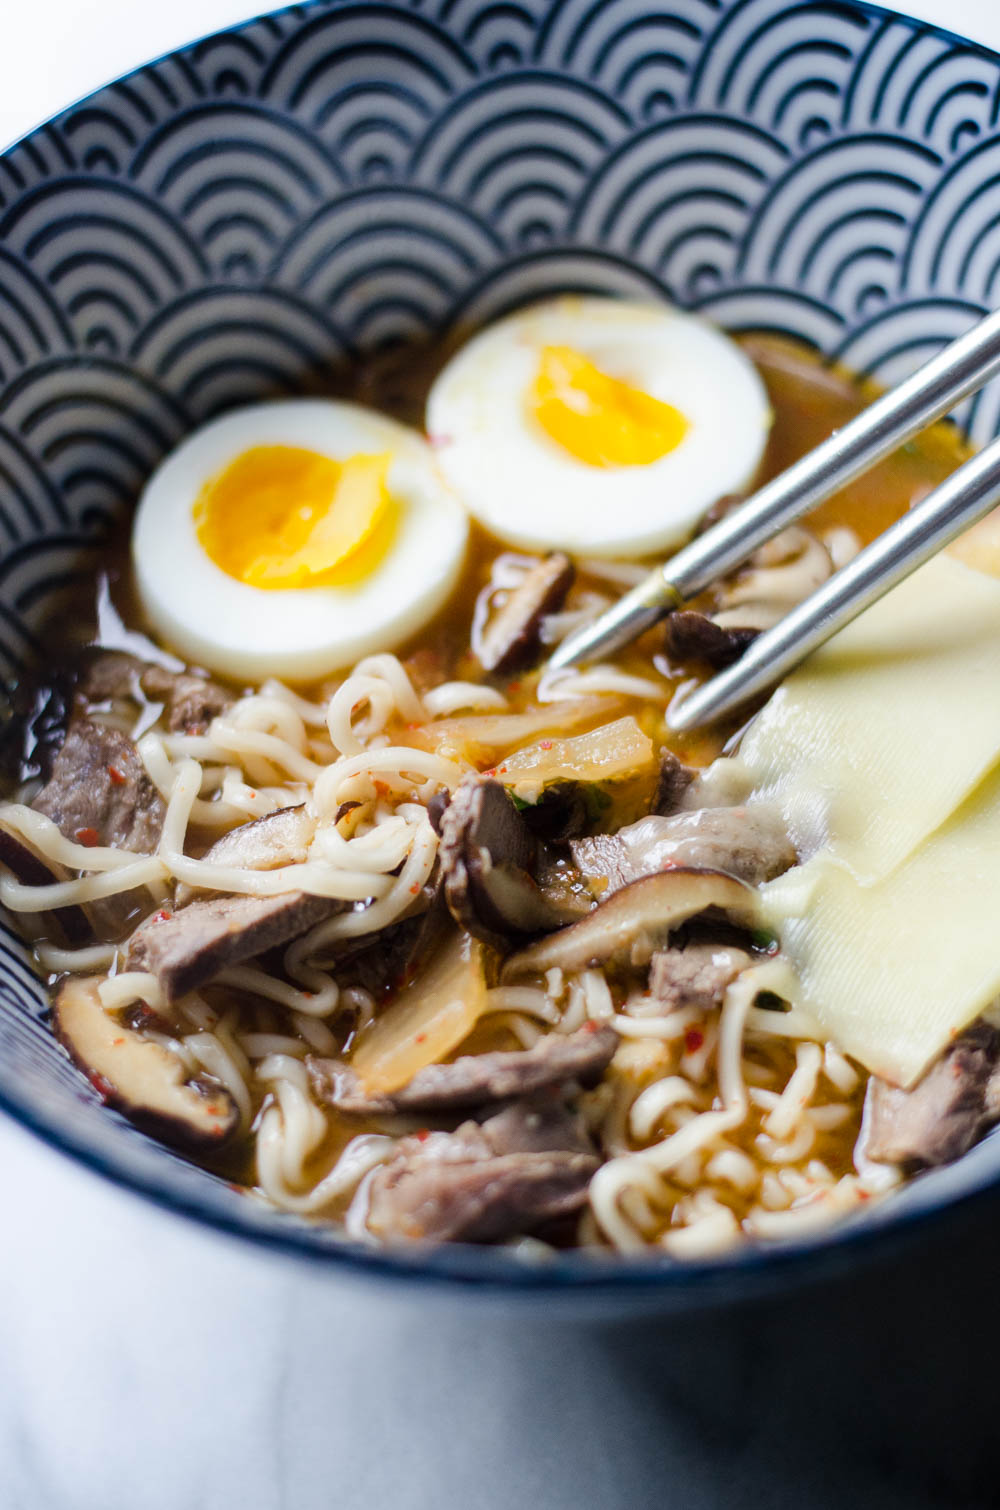 What I Ate Wednesday - Ramen for Supper